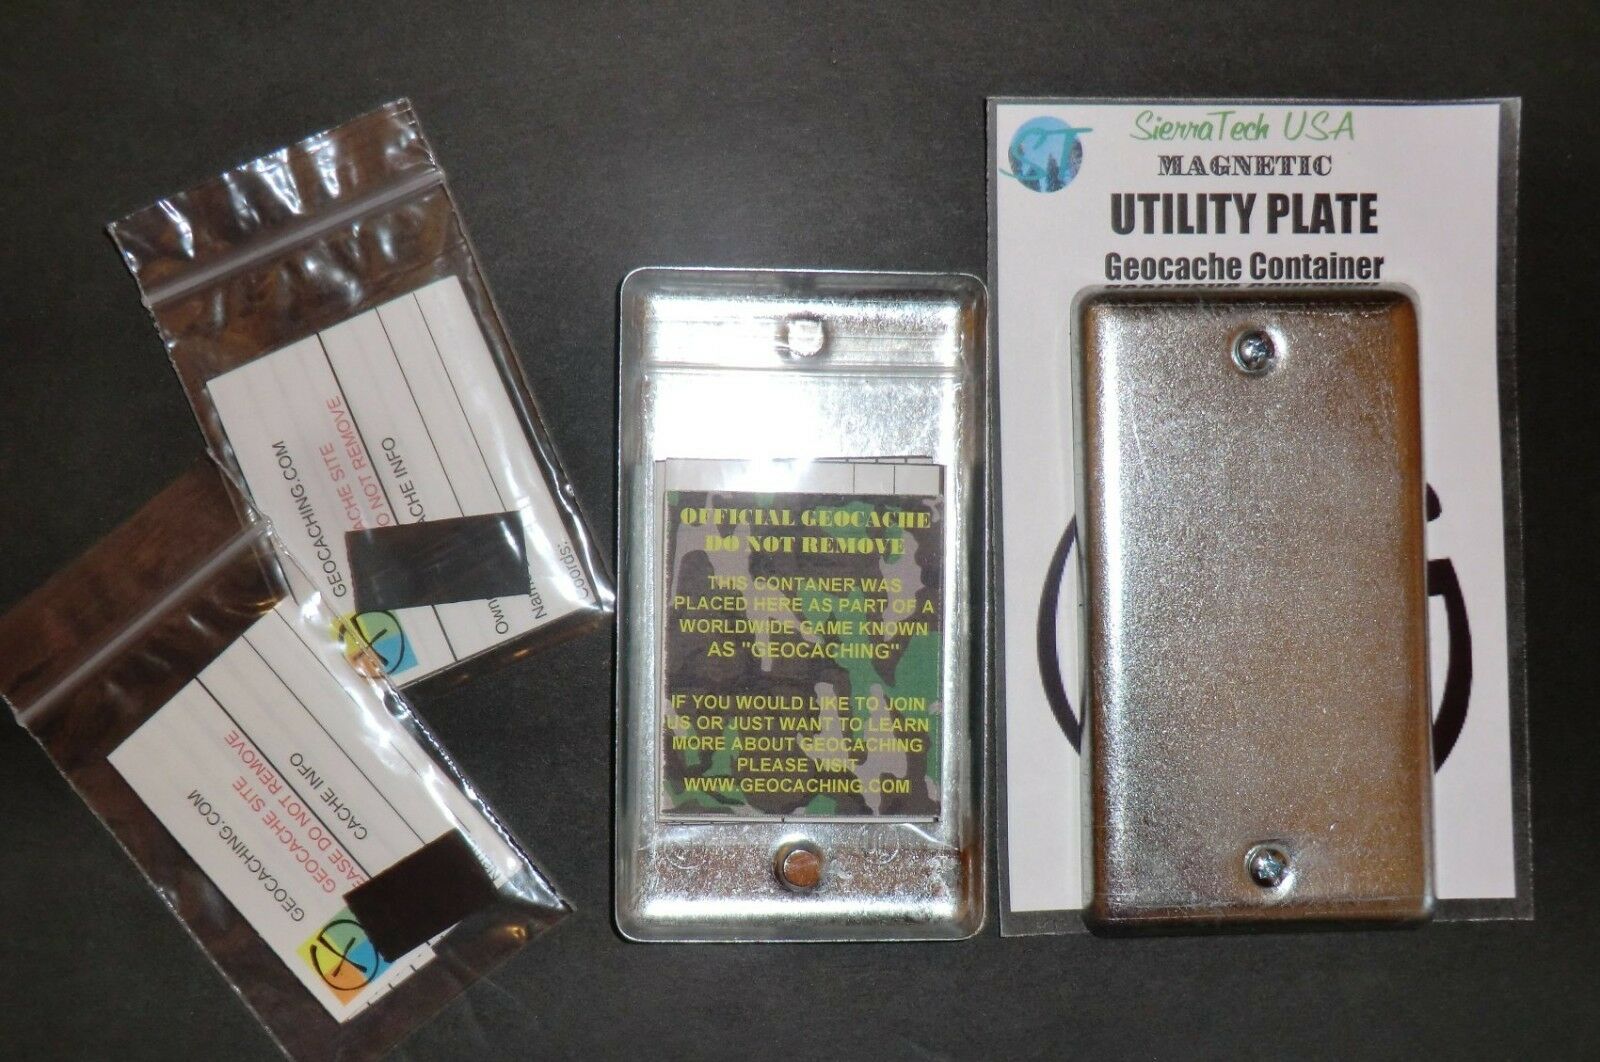 2 Magnetic Utility Electrical Plate Geocache Containers / Geocaching Cache